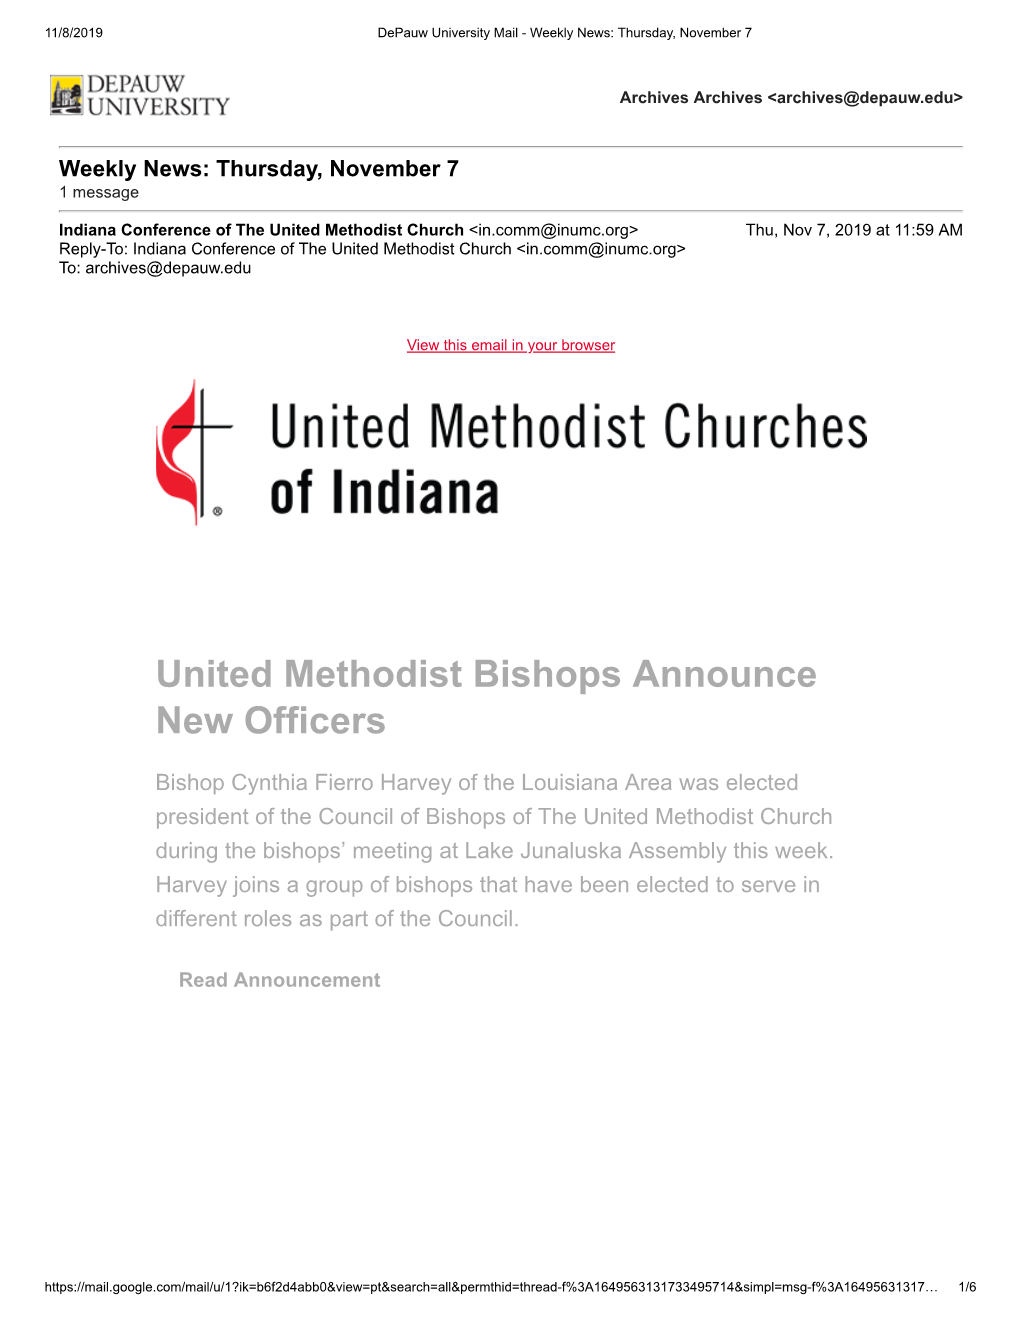 United Methodist Bishops Announce New Officers